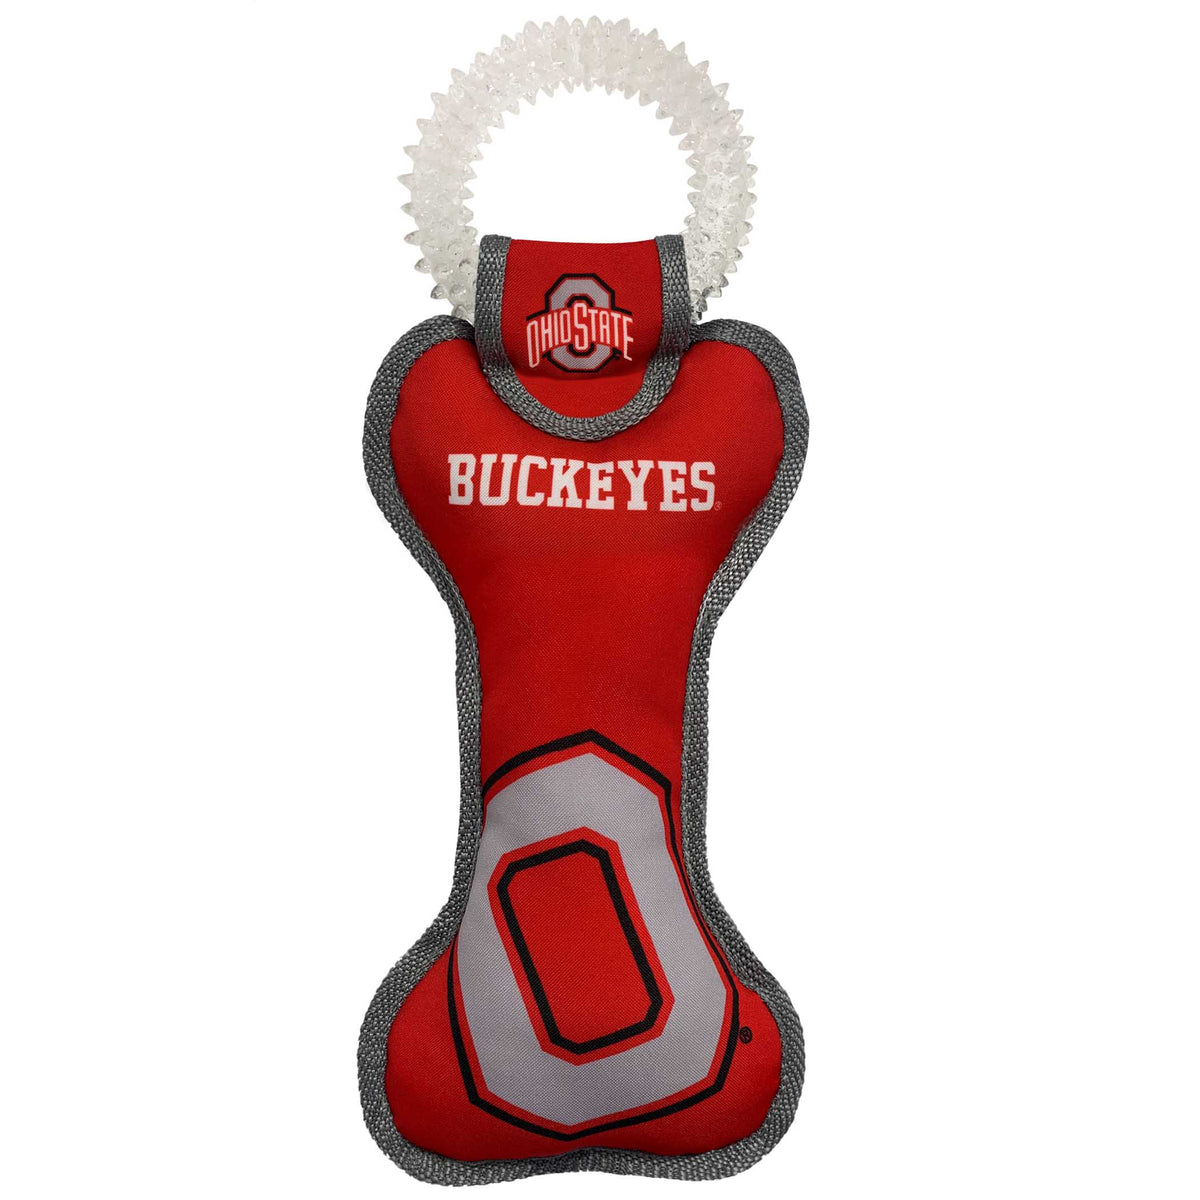 OH State Buckeyes Dental Tug Toys - 3 Red Rovers